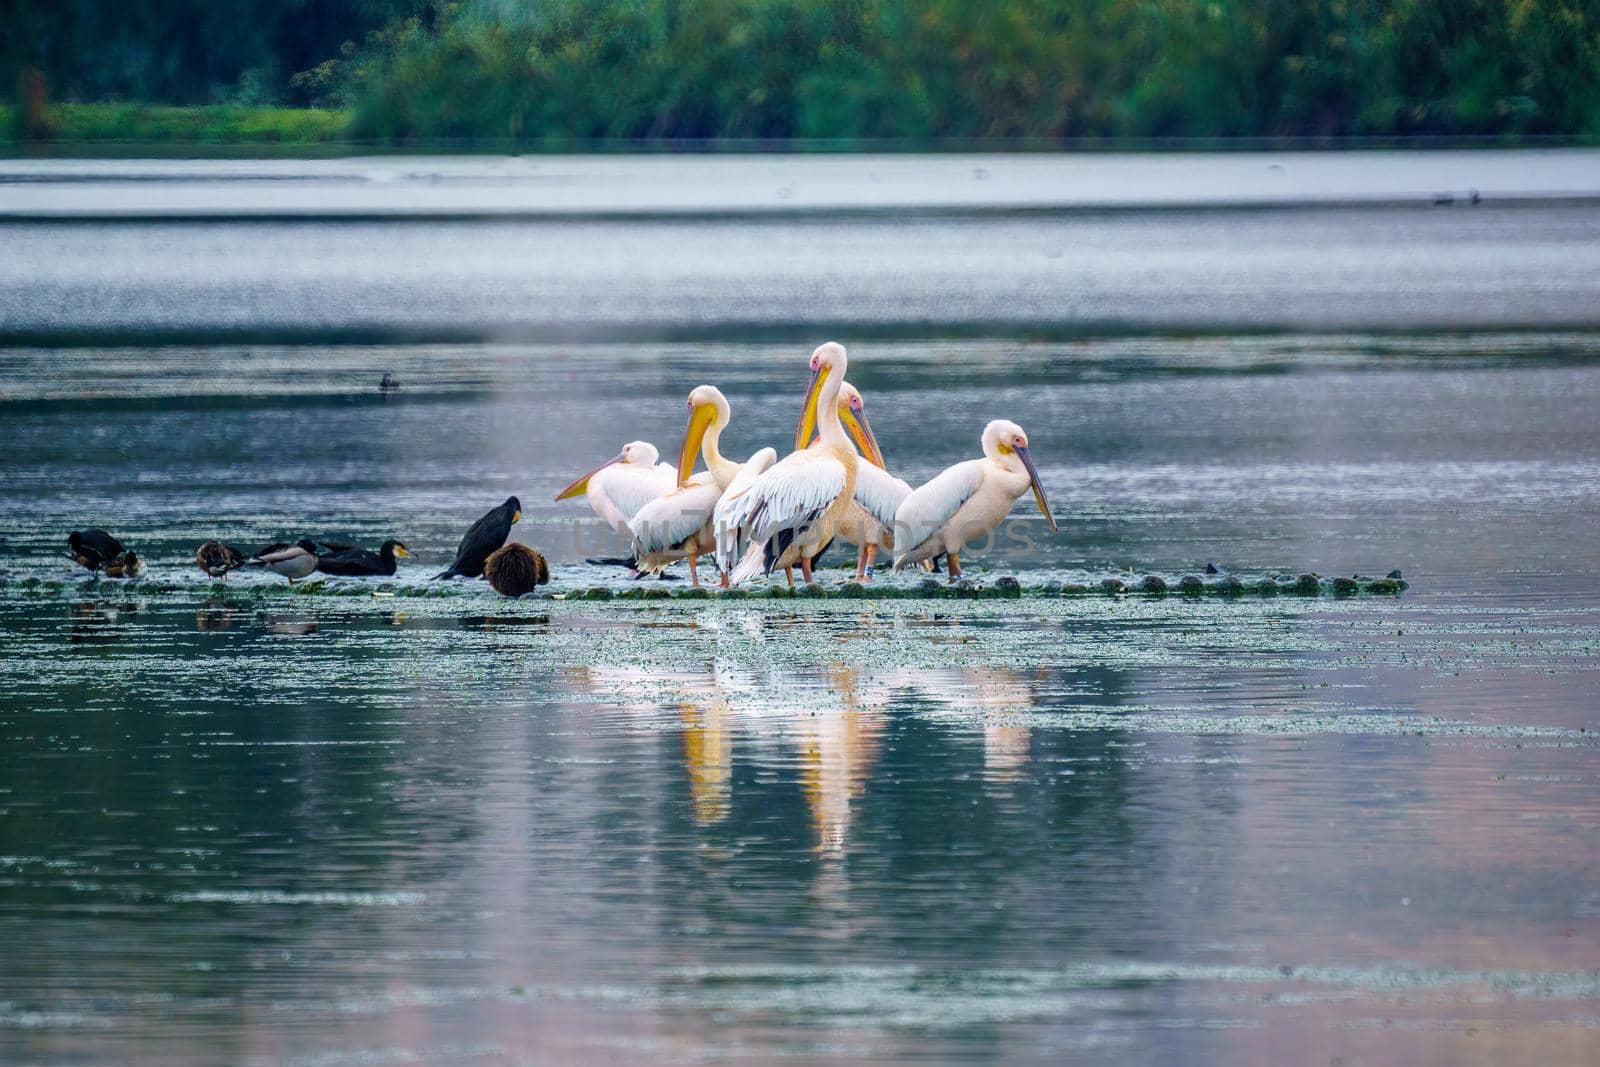 Pelicans, and other birds, in the Hula nature reserve by RnDmS